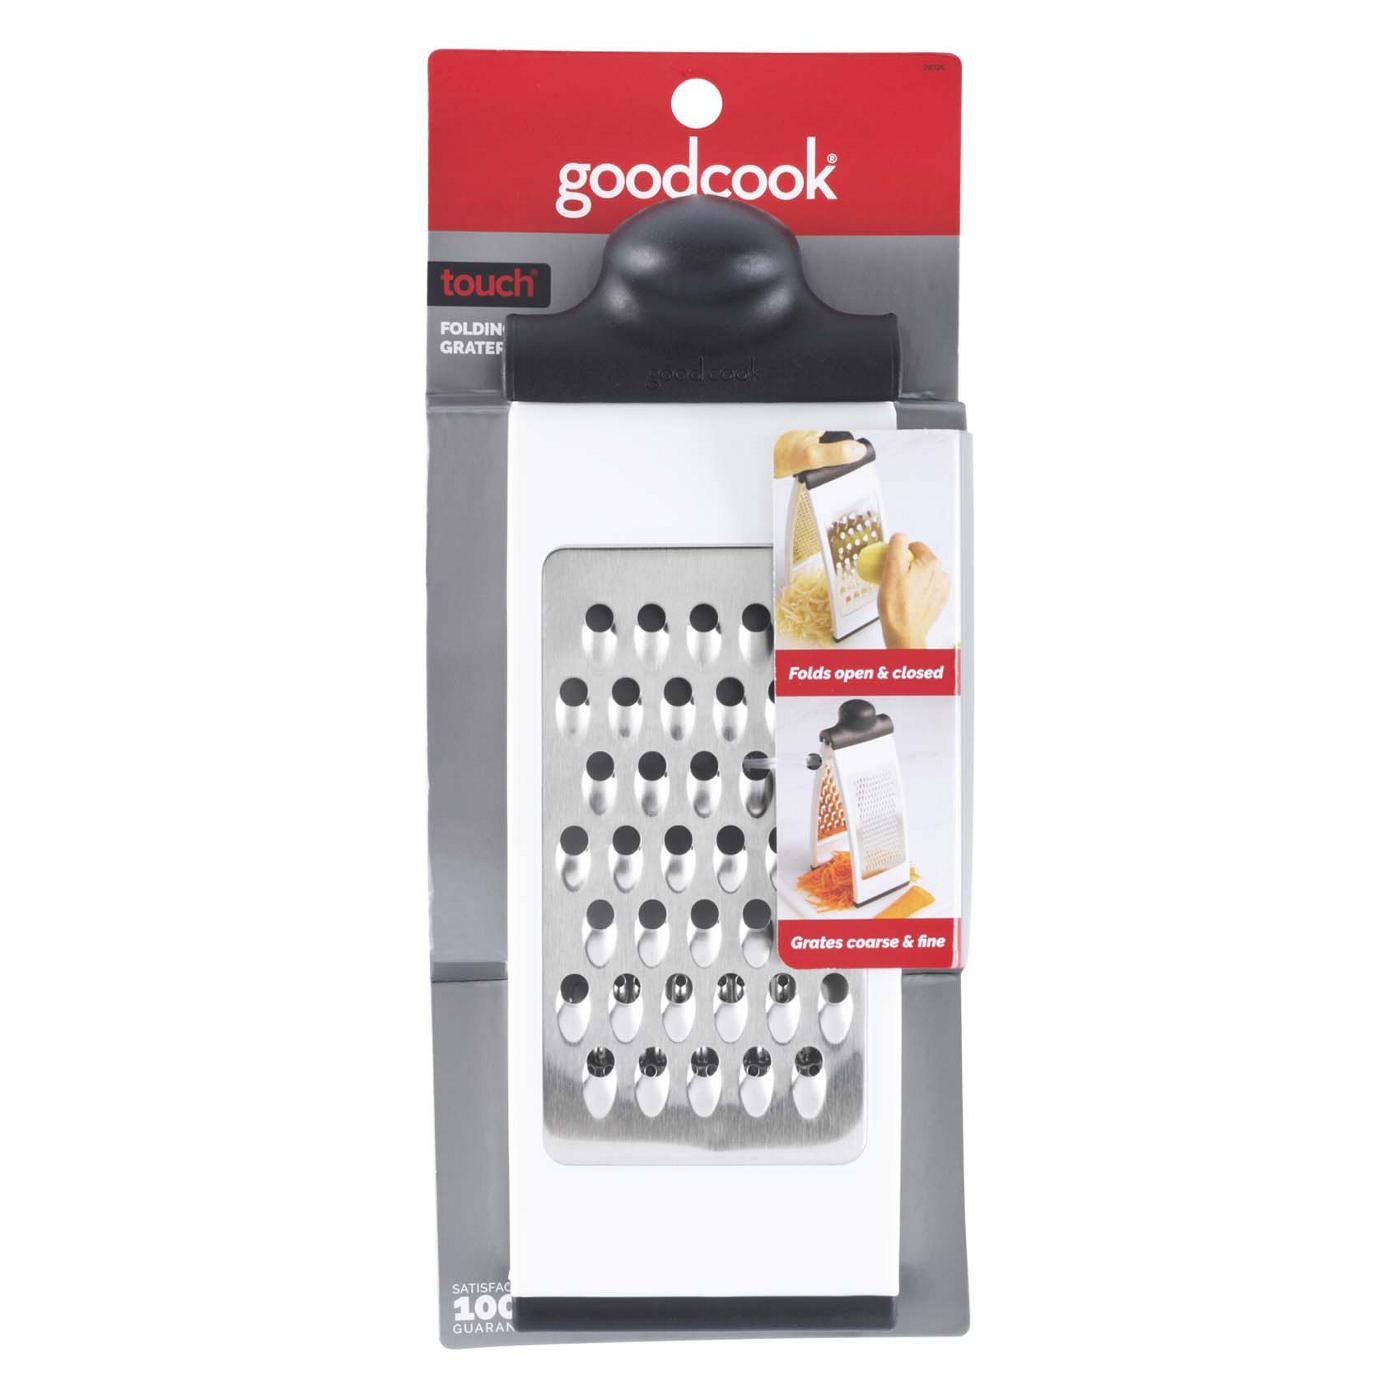 GoodCook Touch Folding Multi-Grater; image 1 of 4